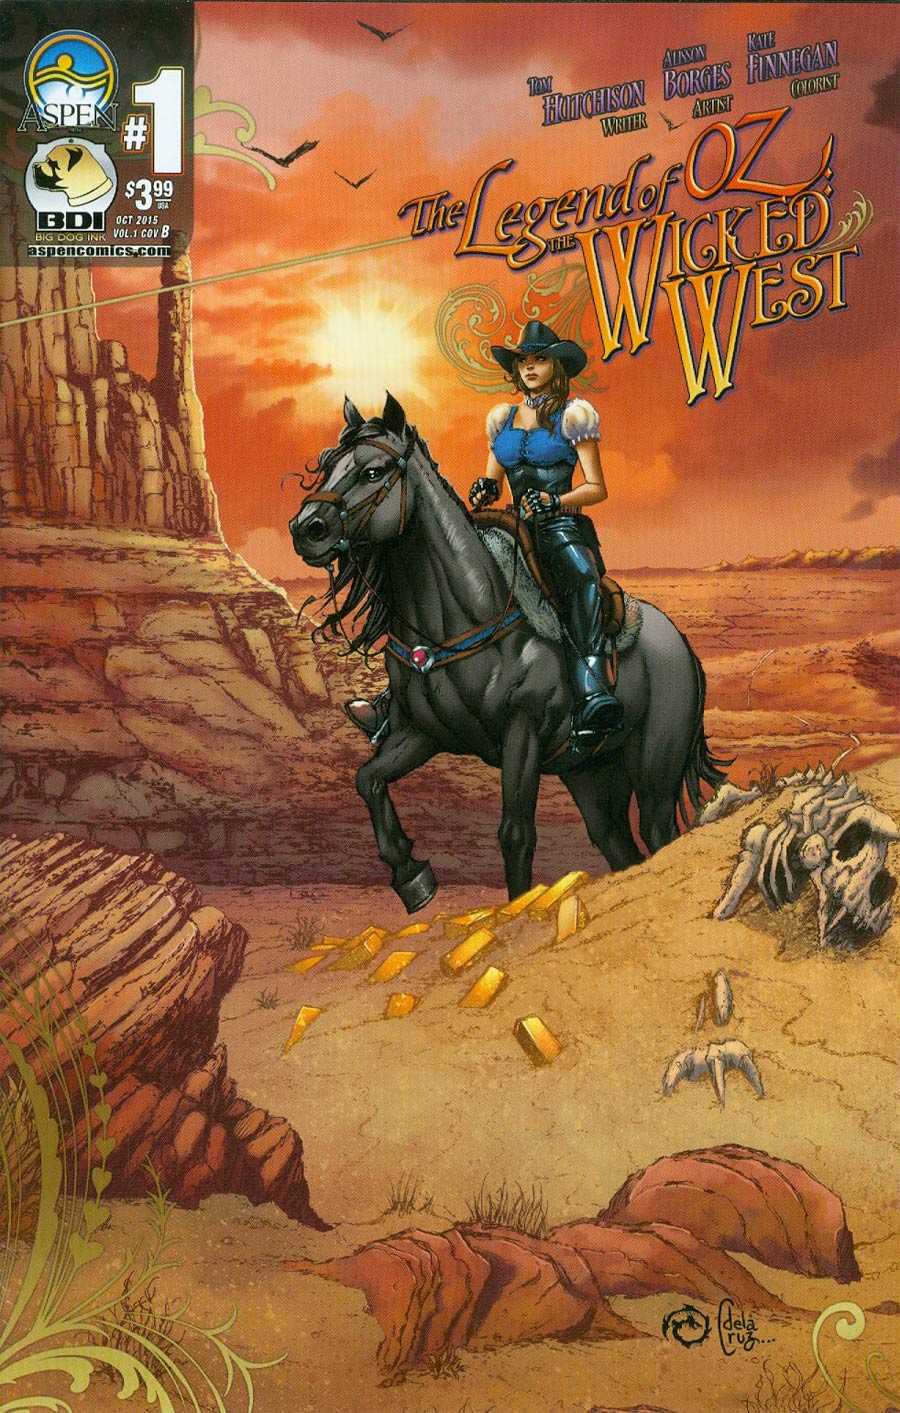 Legend Of Oz The Wicked West Vol 3 #1 Cover B Variant Jesse Wichmann Cover